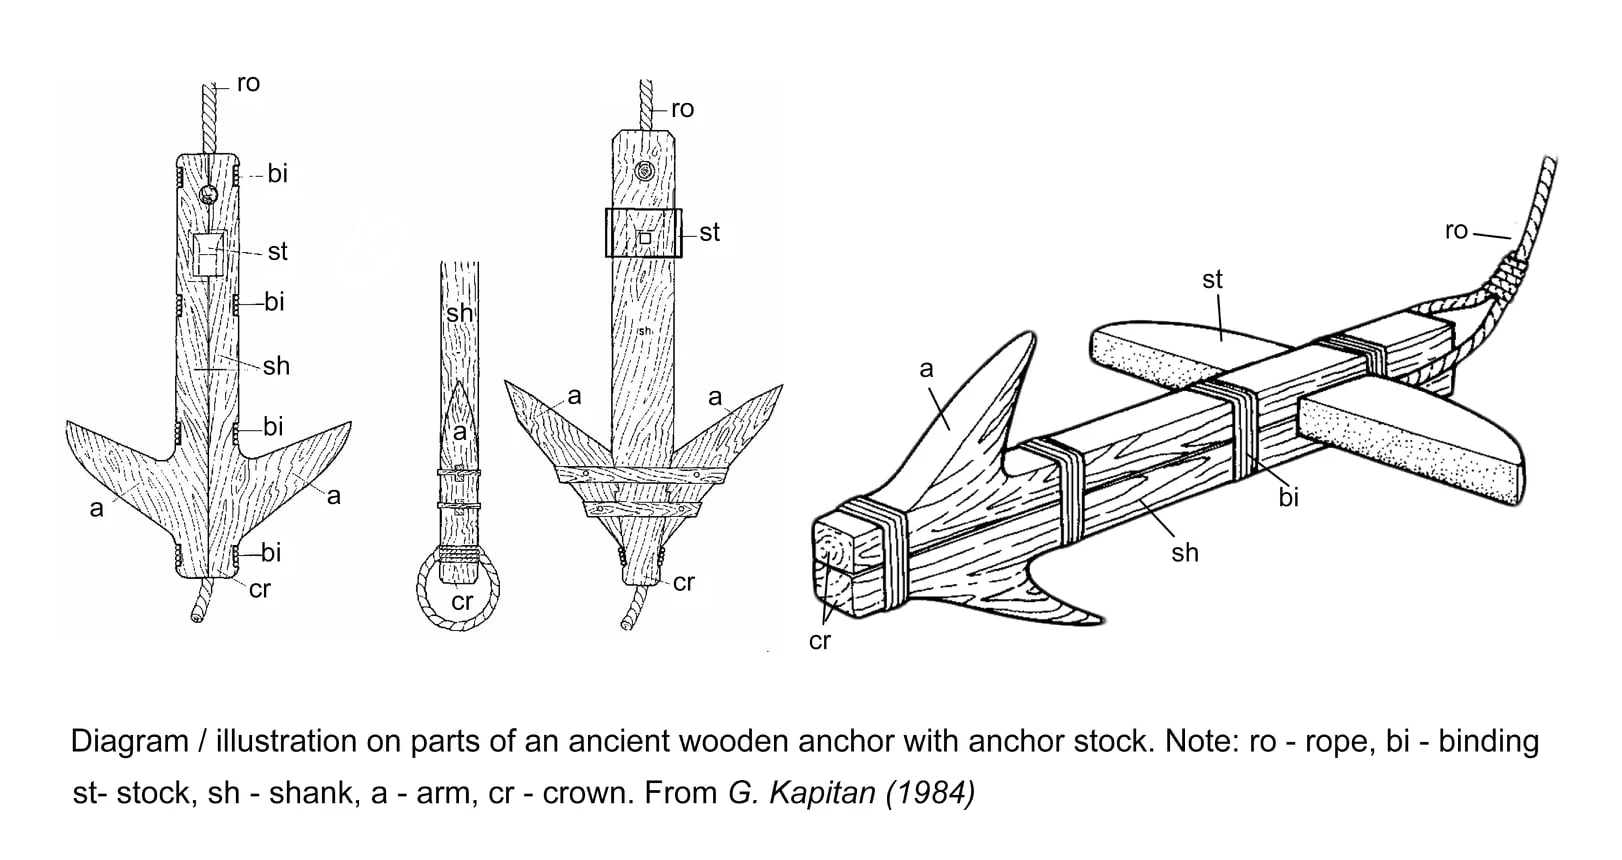 Illustration on parts of an ancient wooden anchor with anchor stock. (from G. Kapitan 1984)